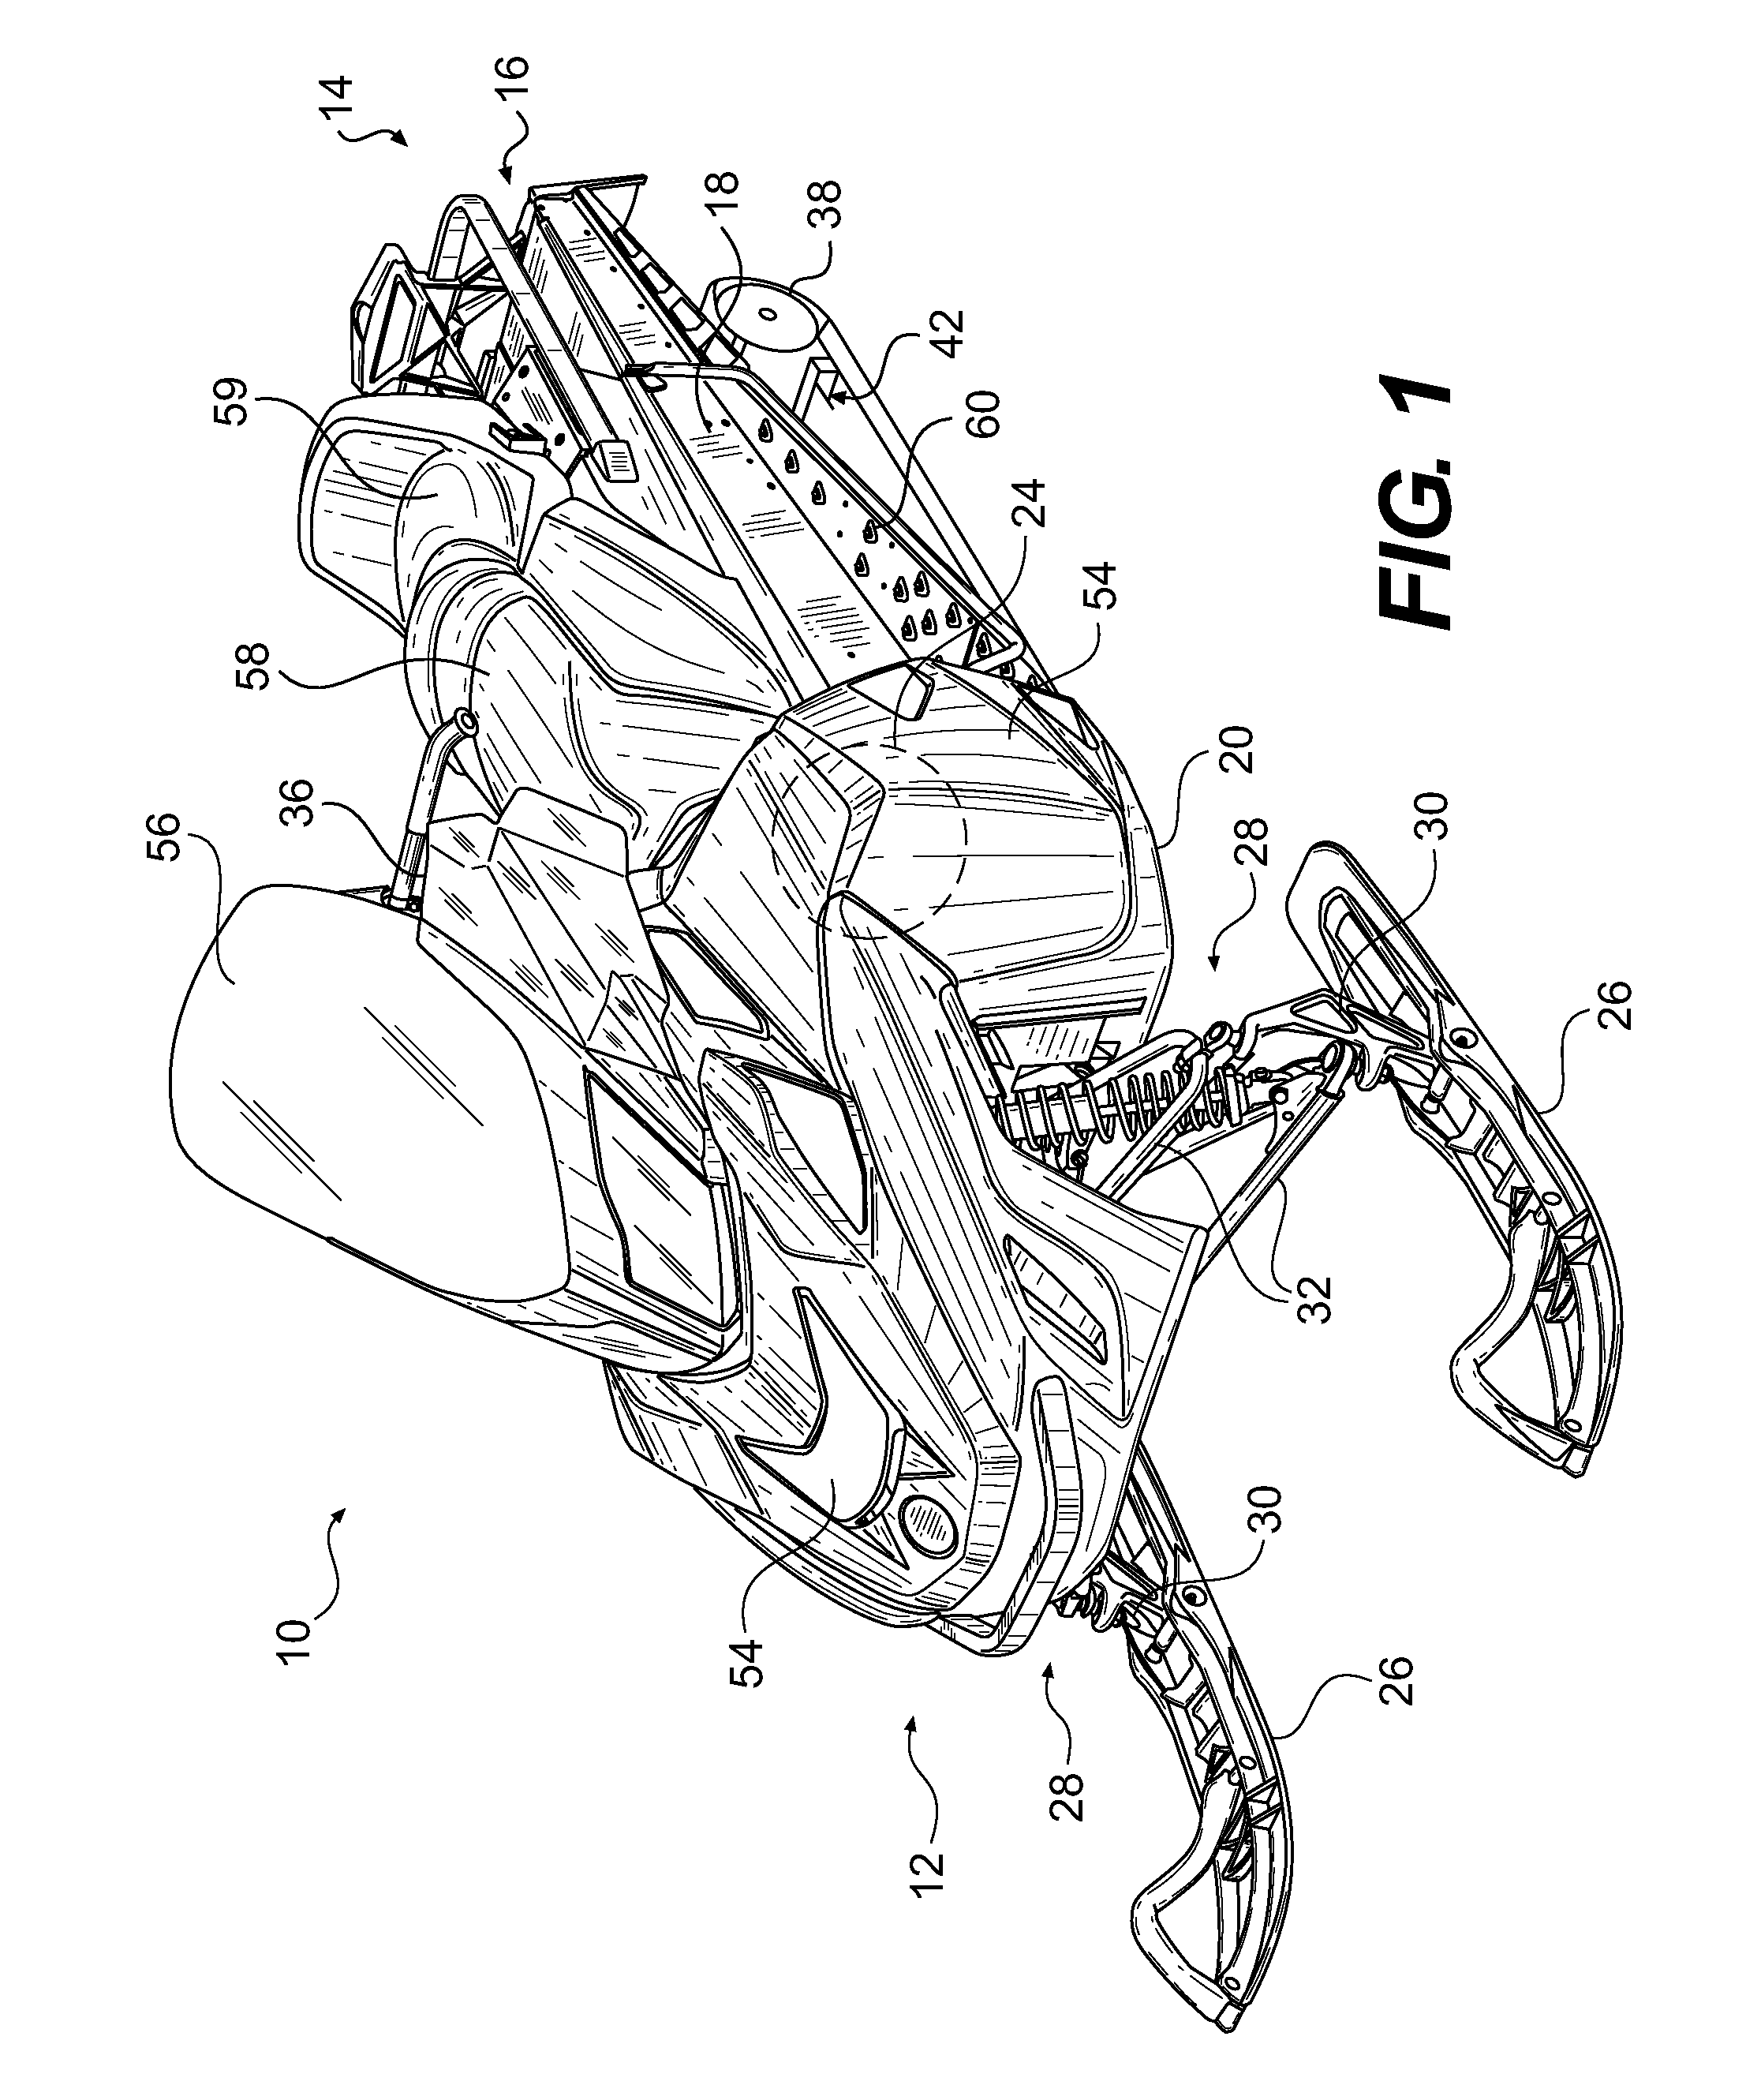 Snowmobile Exhaust System